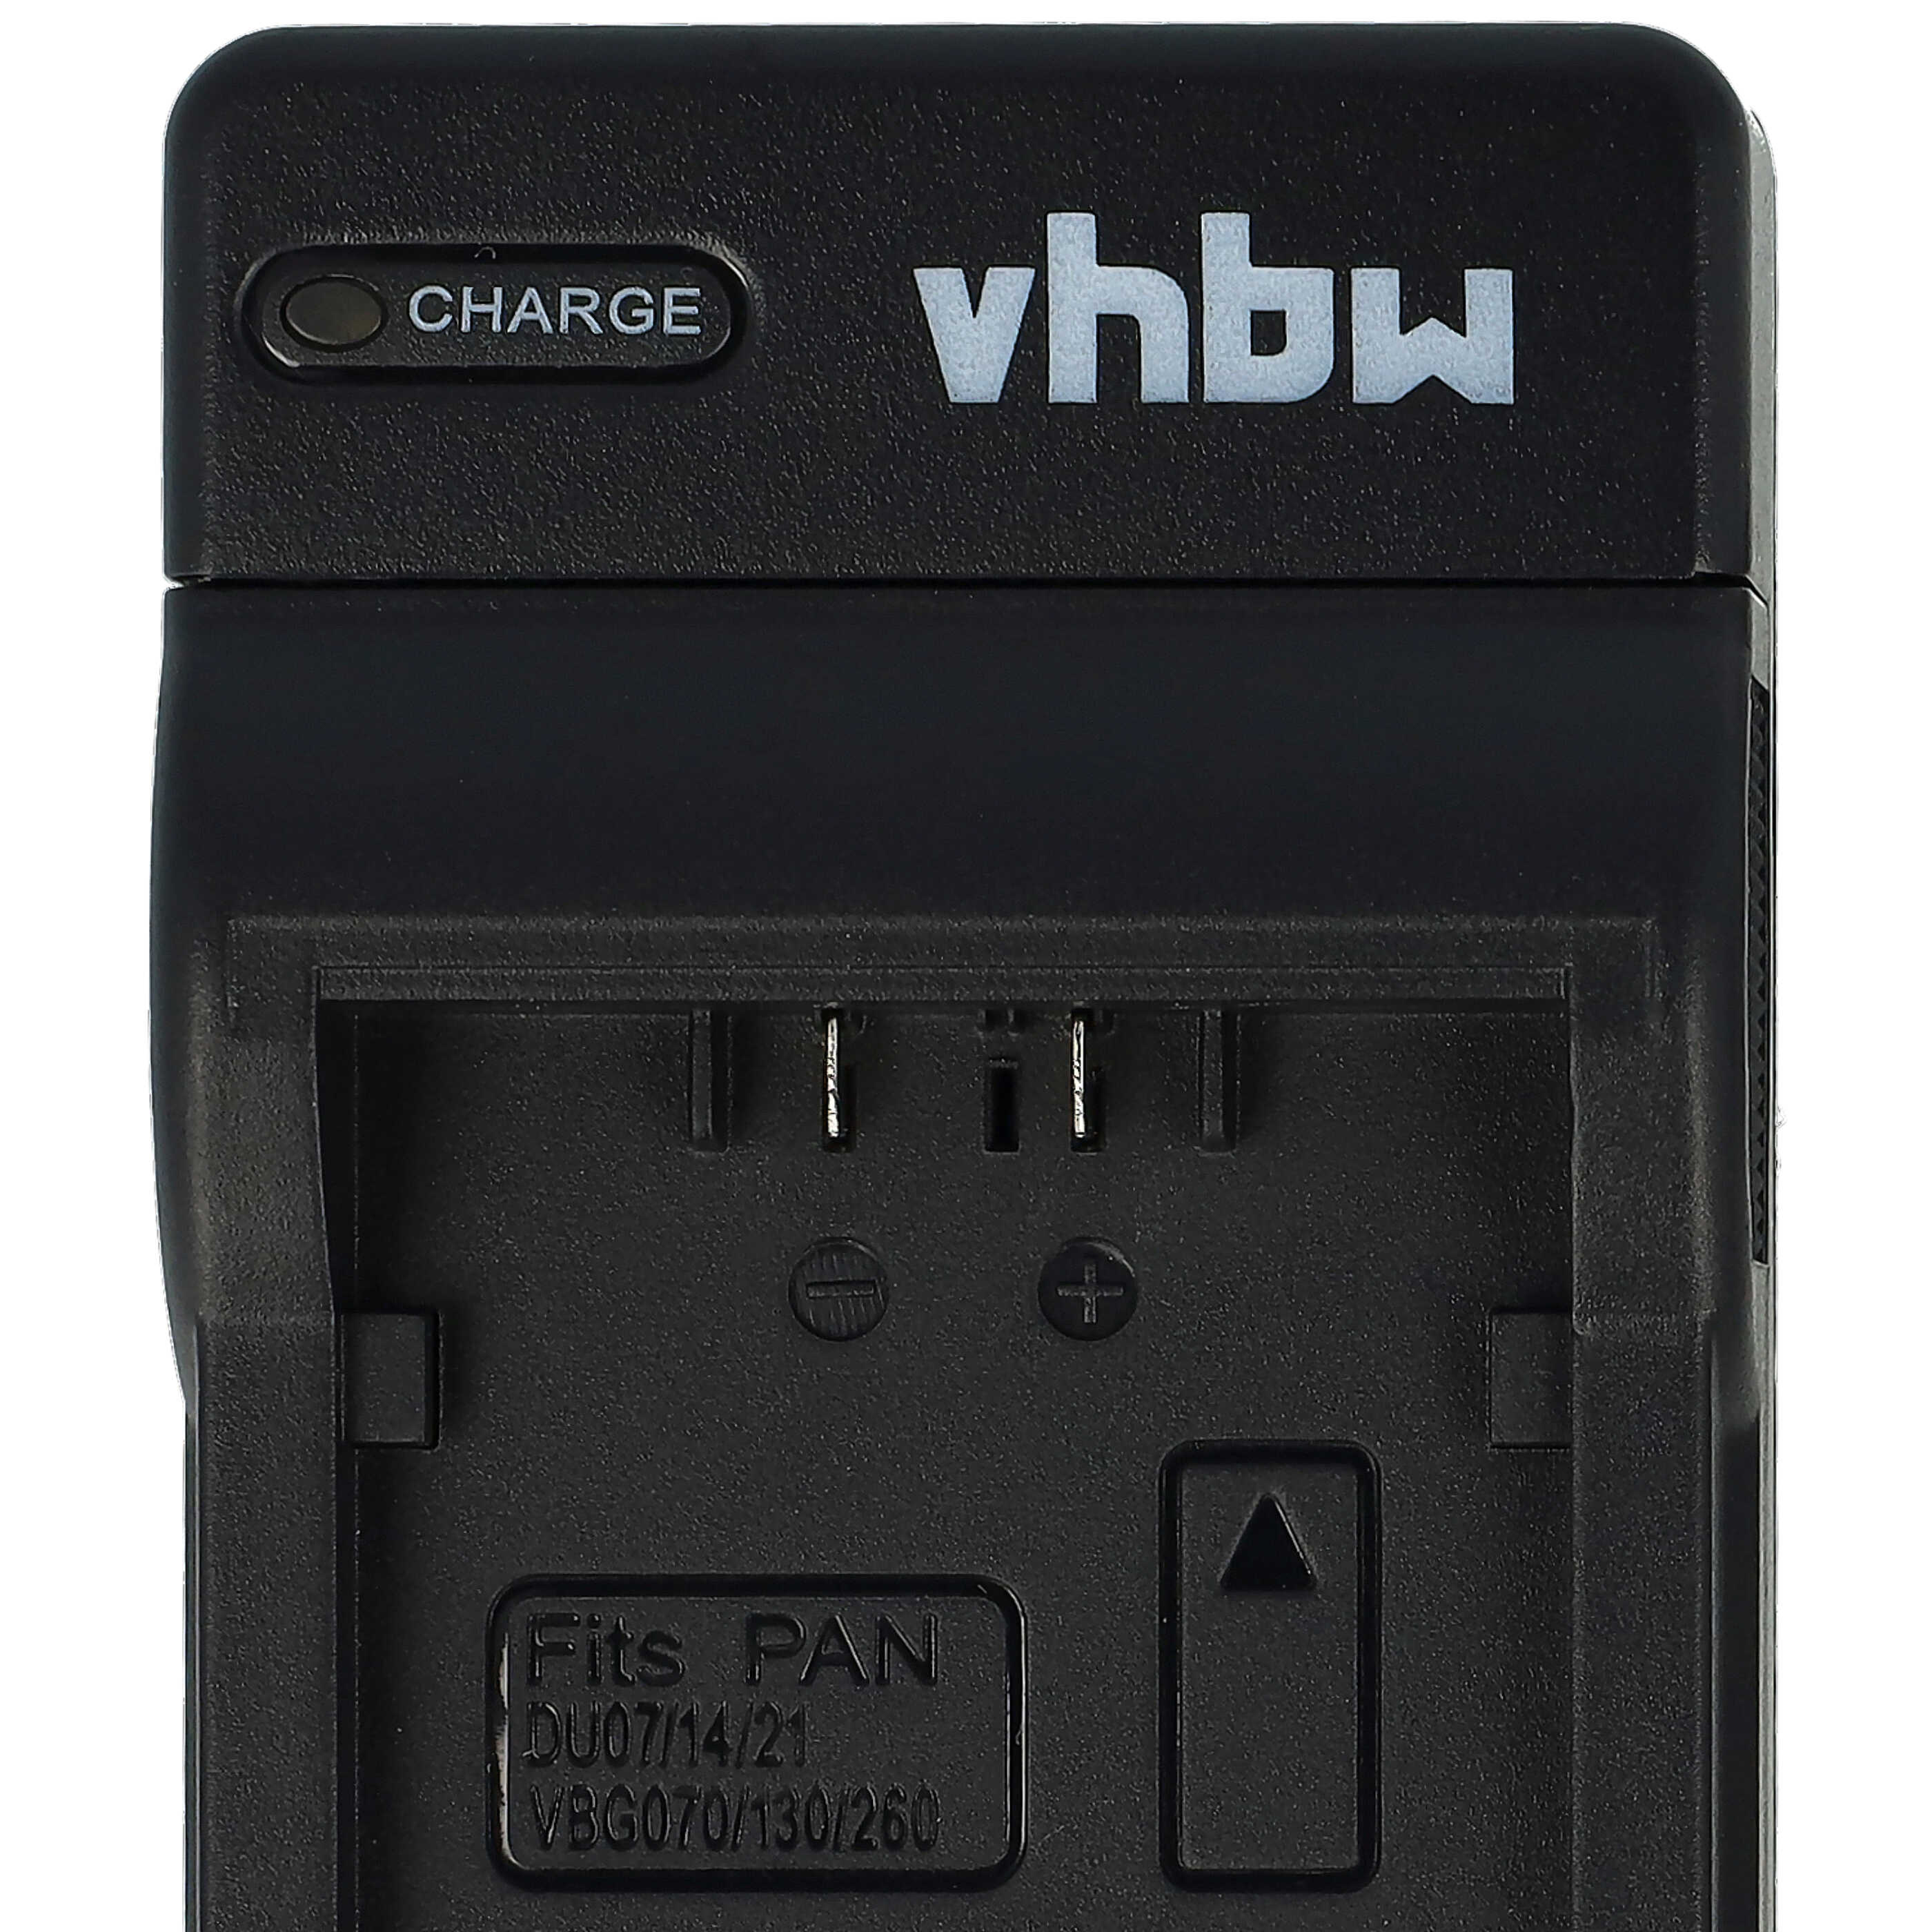 Battery Charger suitable for DZ-MV350A Camera etc. - 0.5 A, 8.4 V